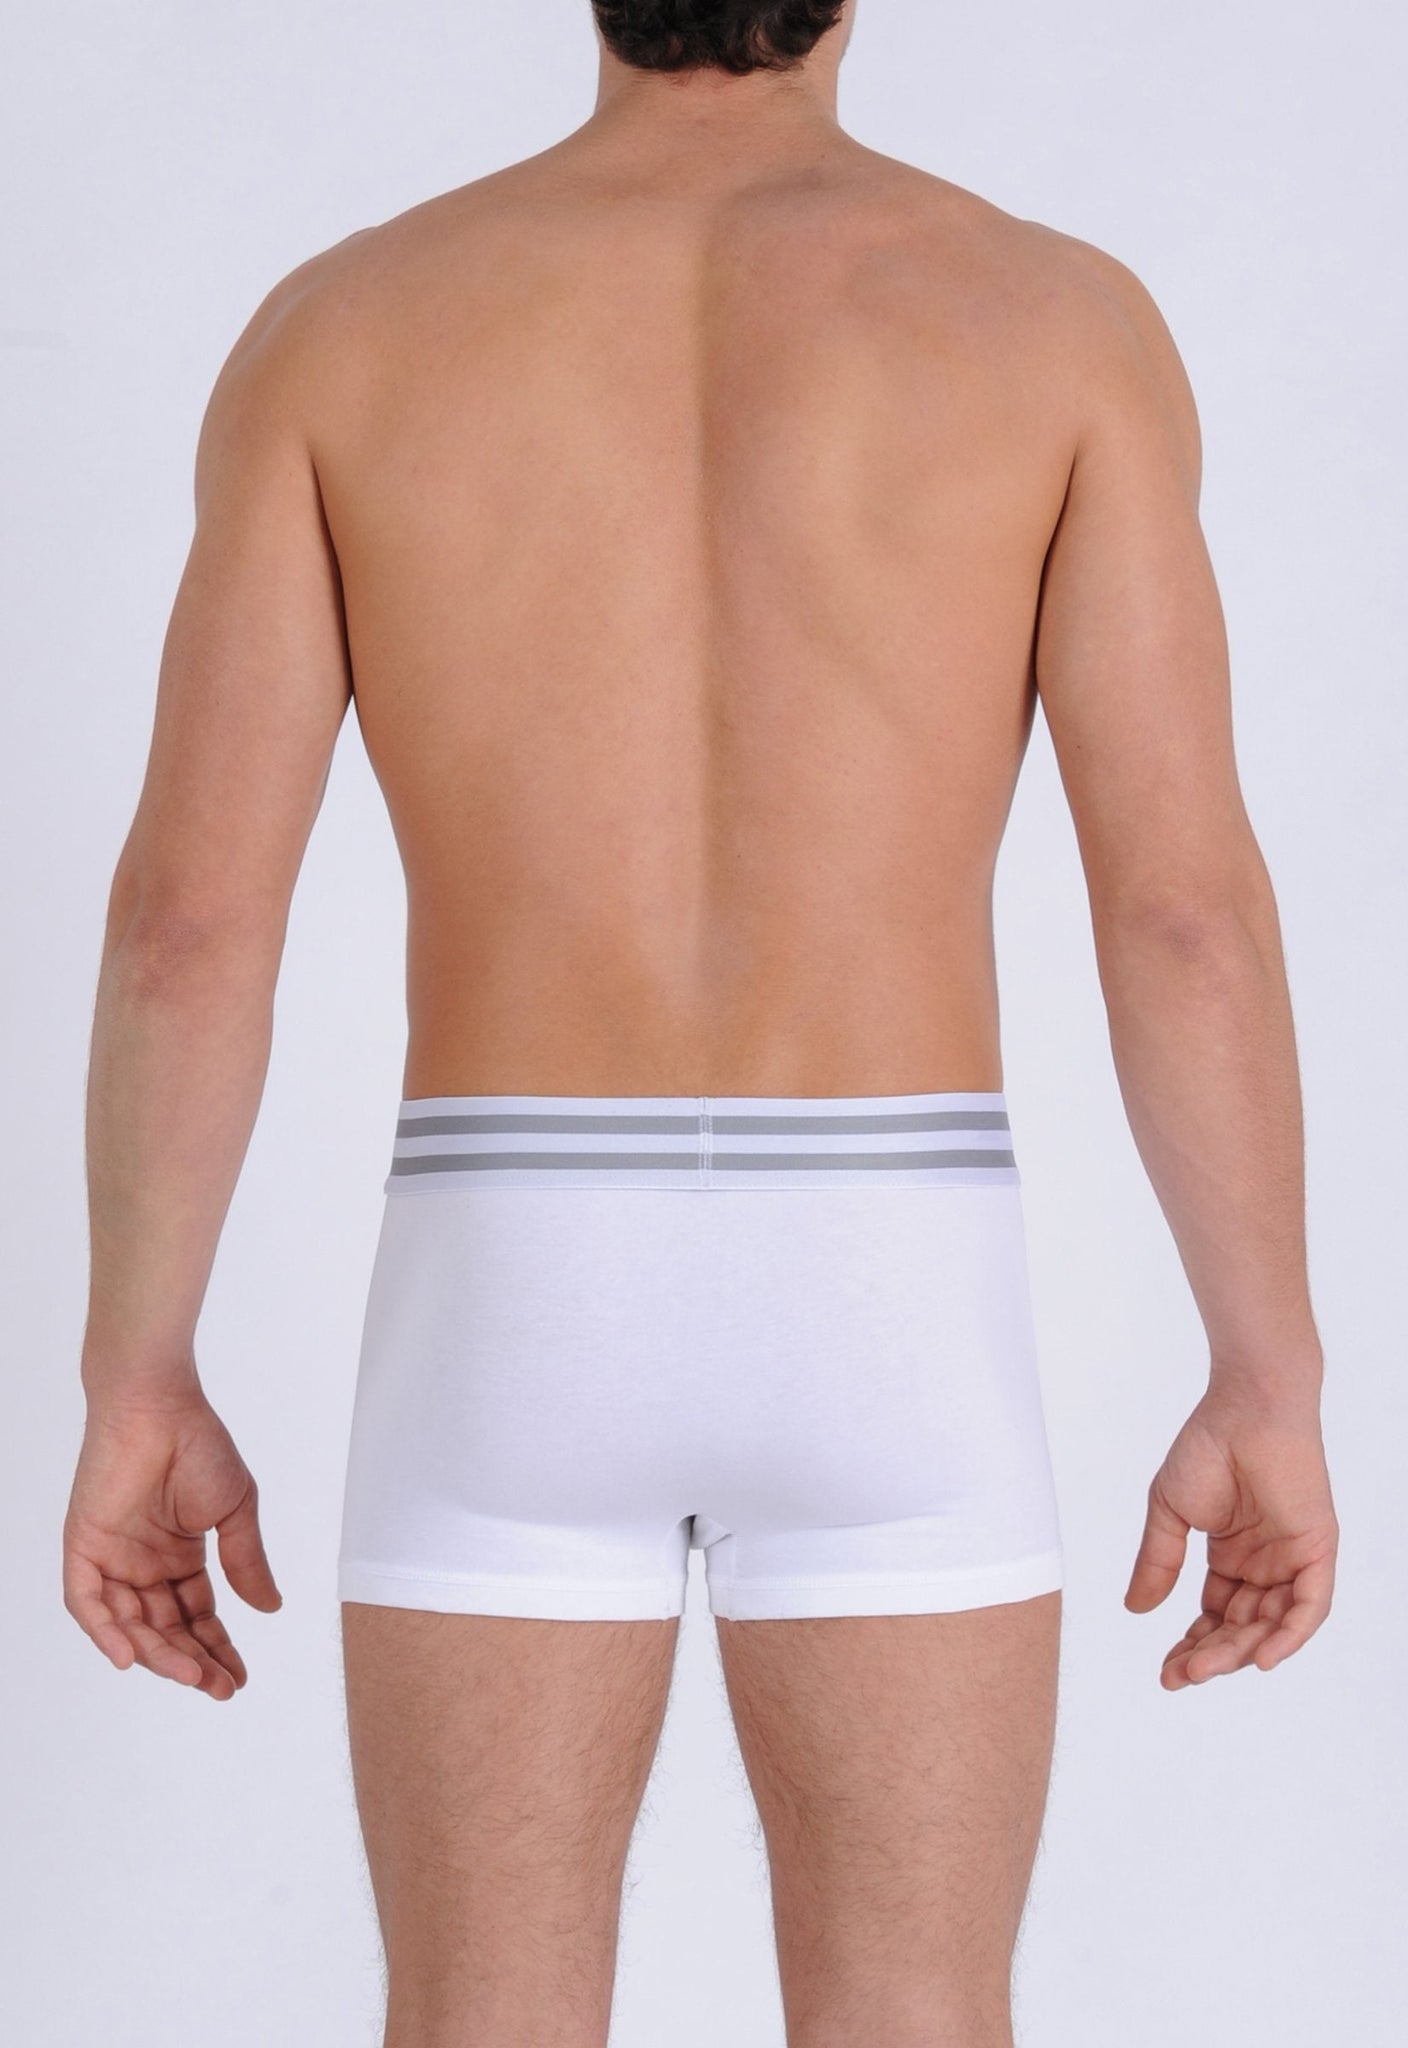 Ginch Gonch Signature Series - Trunk, short boxer brief - white men's underwear thick printed waistband back